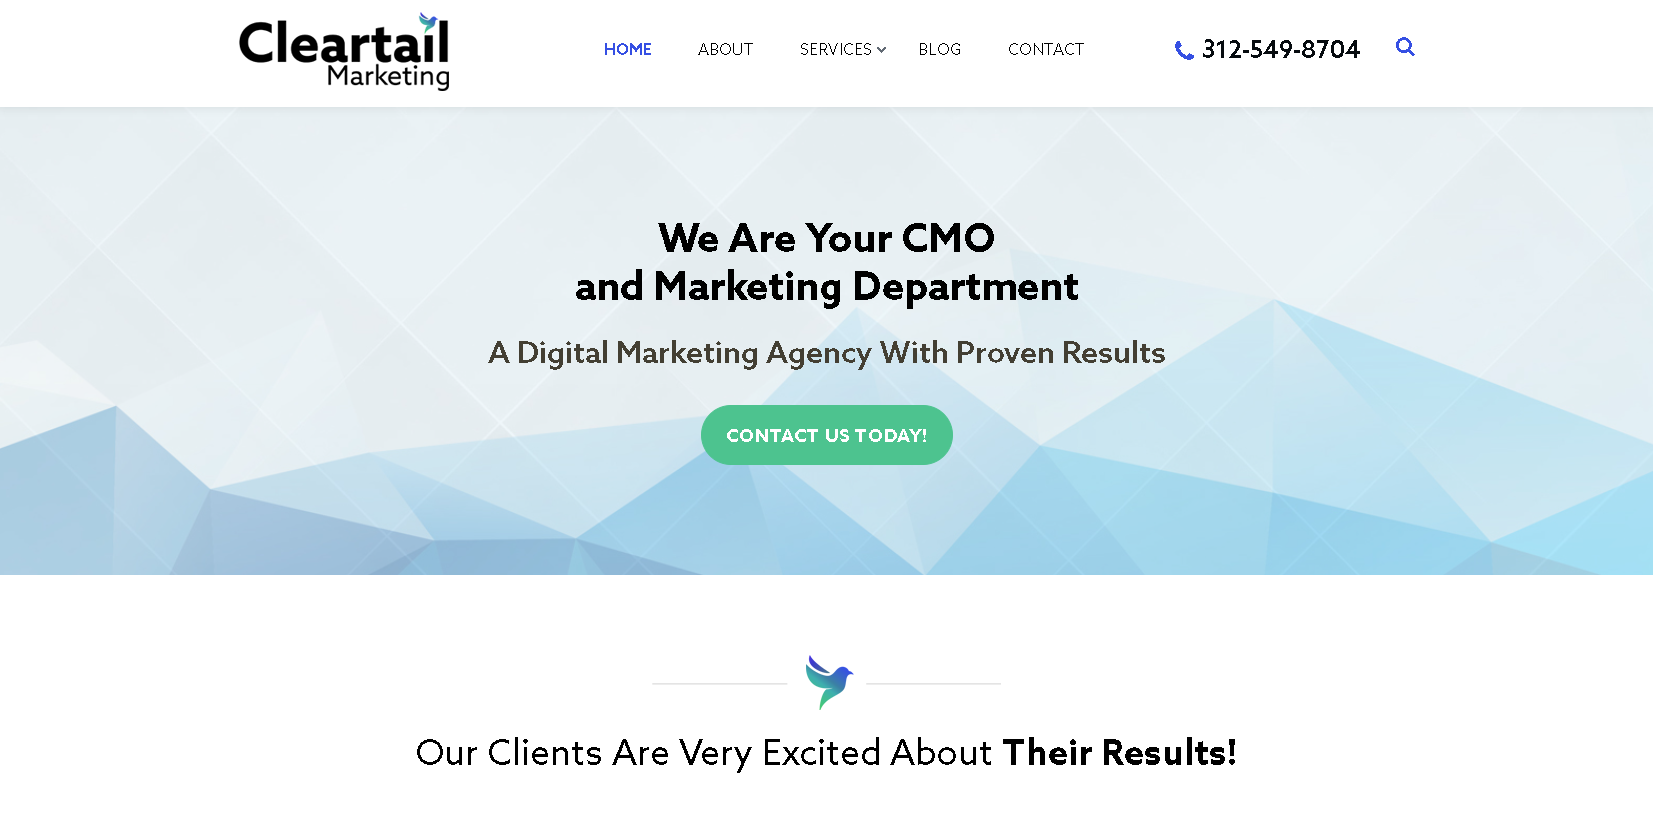 Cleartail Marketing